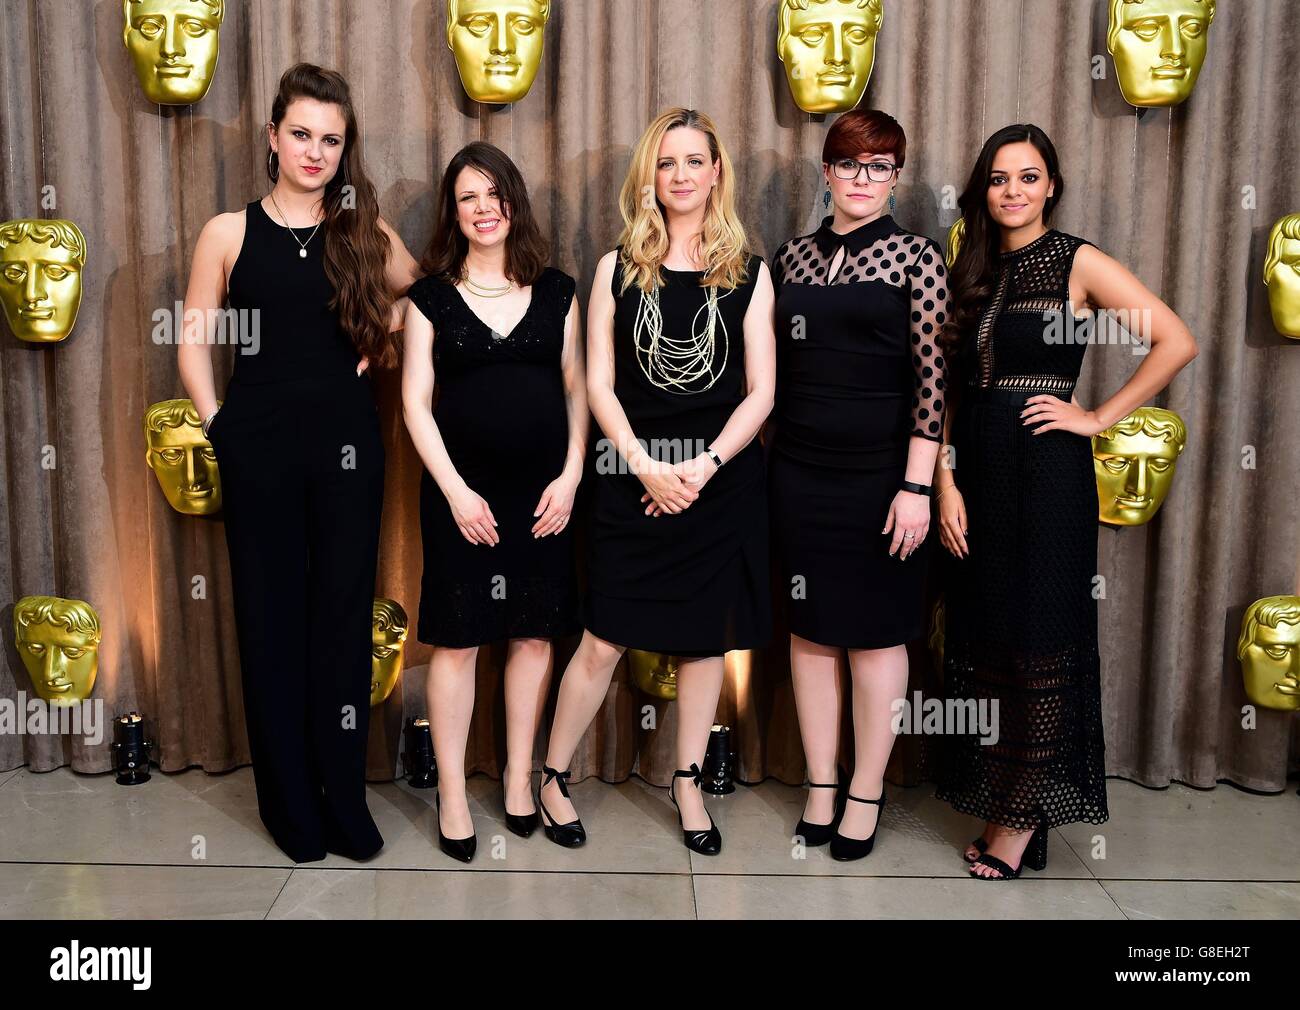 (left to right) Daisy-May Hudson, Jenny Saunders, Laura Wade, Catherine Woolley and Aysha Kala attending the BAFTA Breakthrough Brits event at the Burberry store in central London. Stock Photo